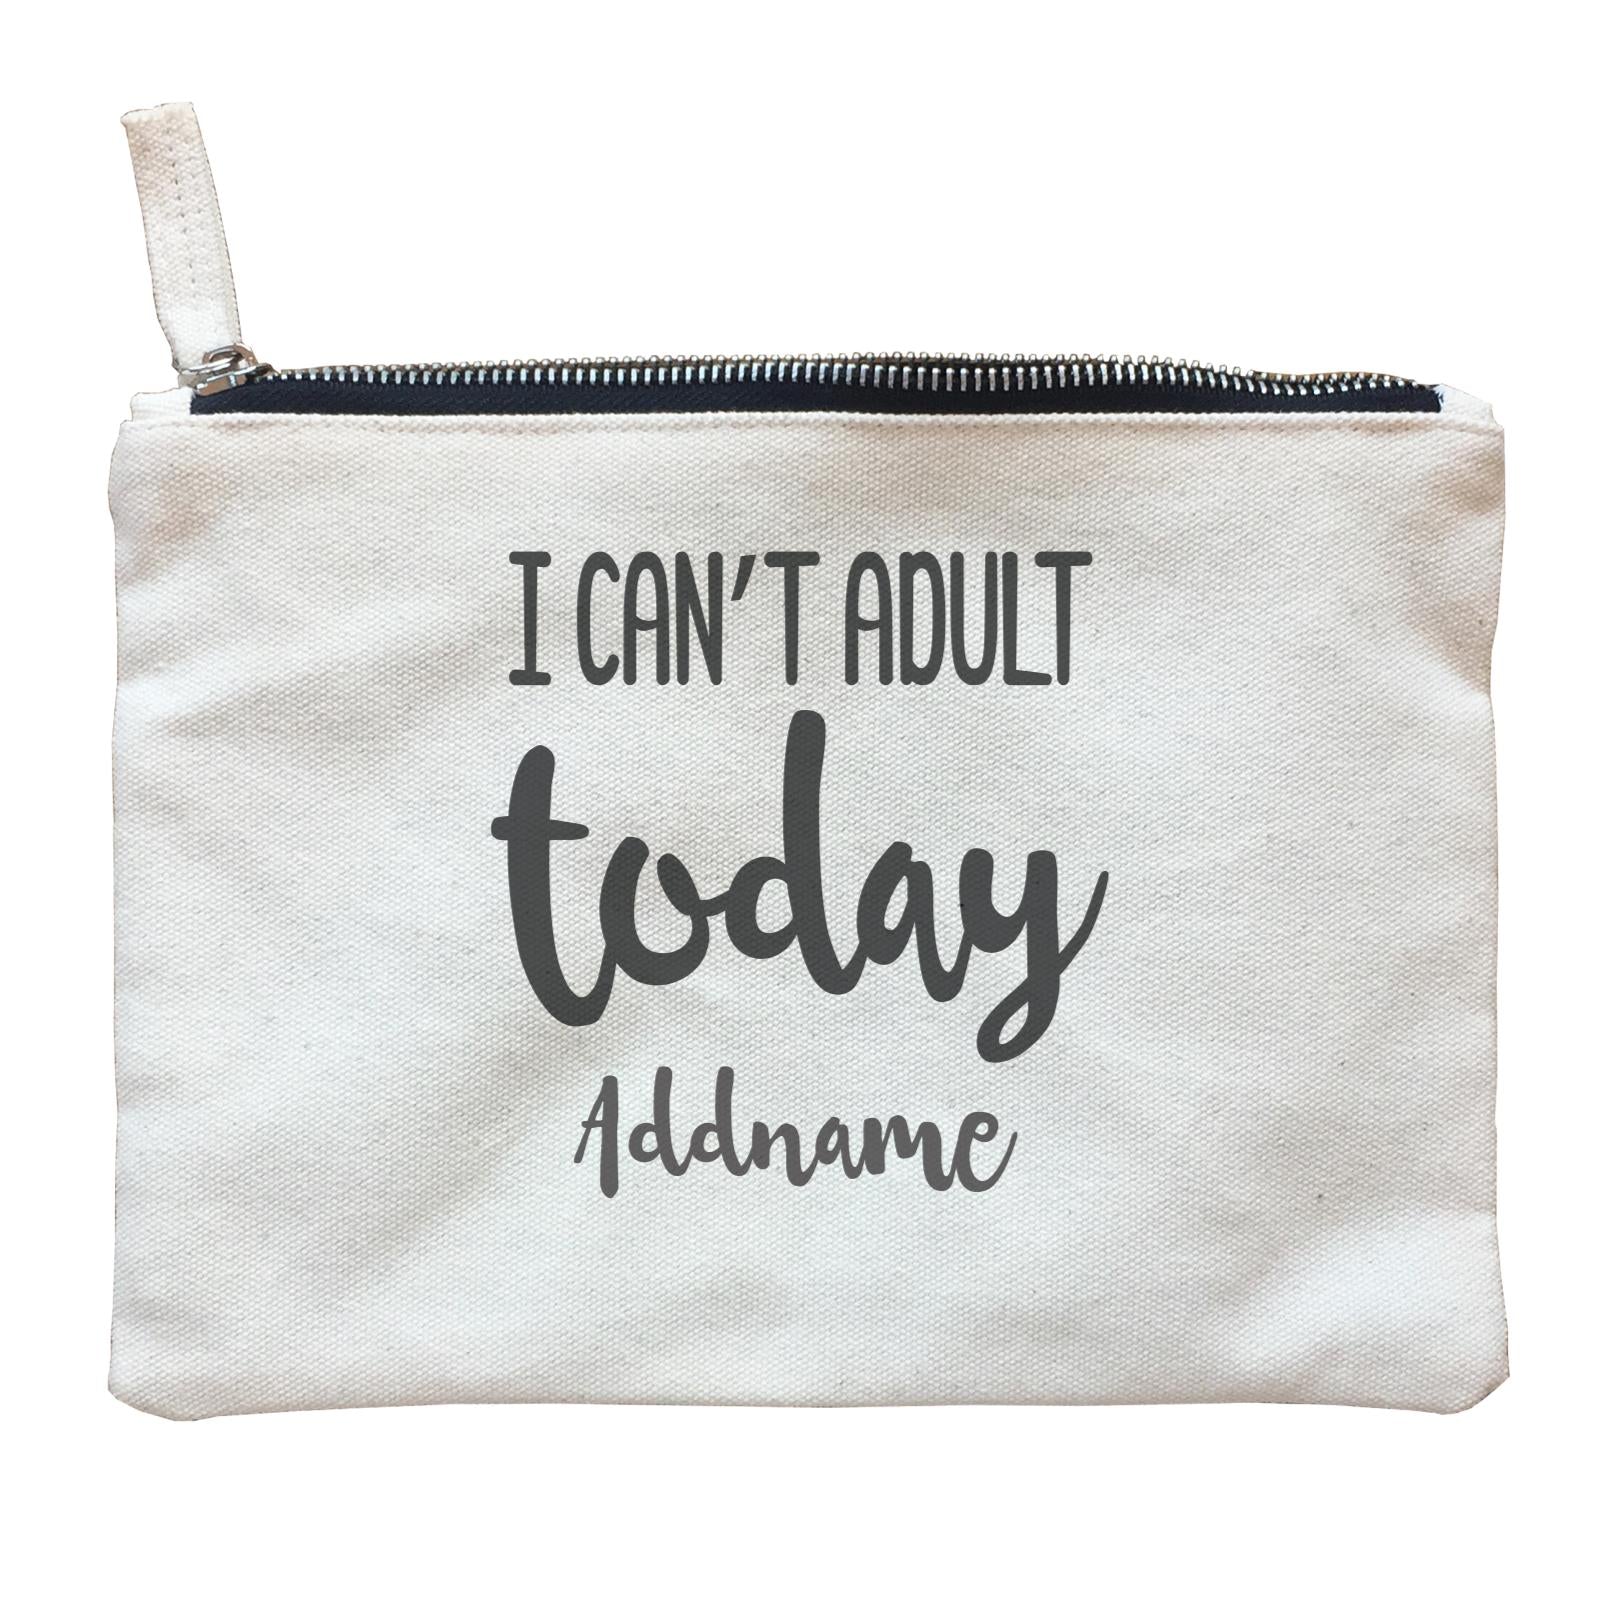 Random Quotes I can't Adult Today Addname Zipper Pouch